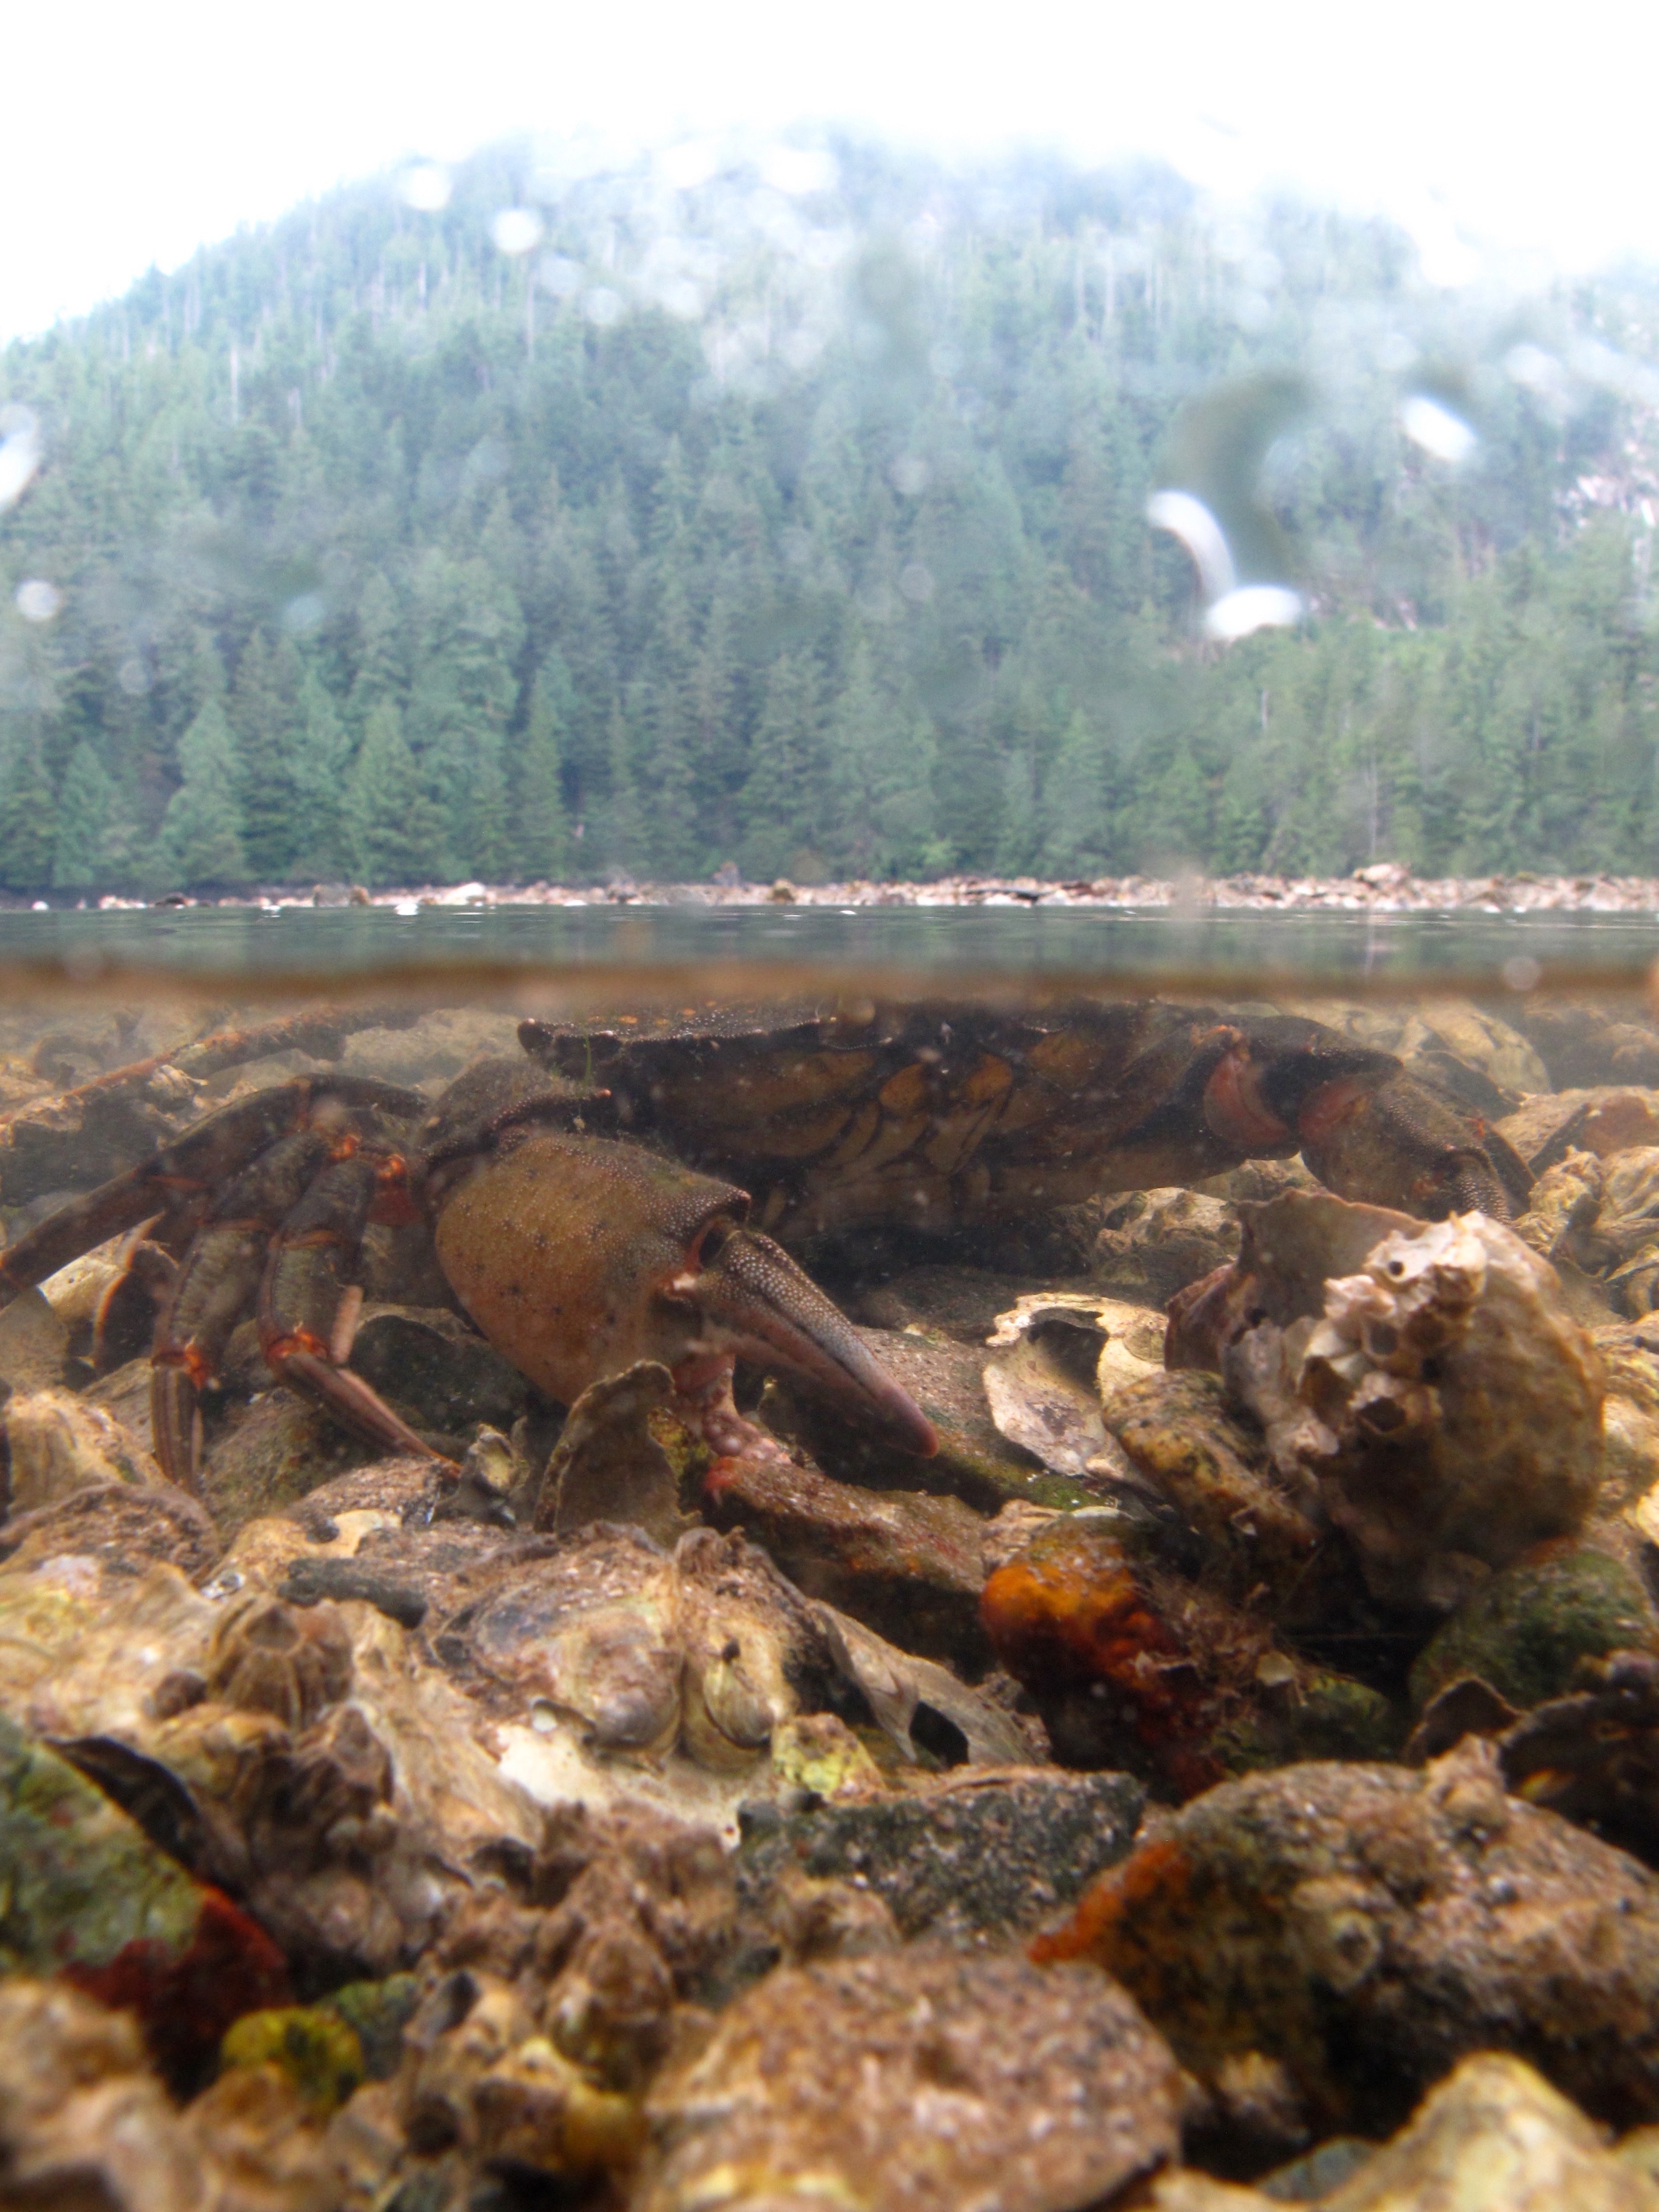 Underwater view of a crab eating an oyster.